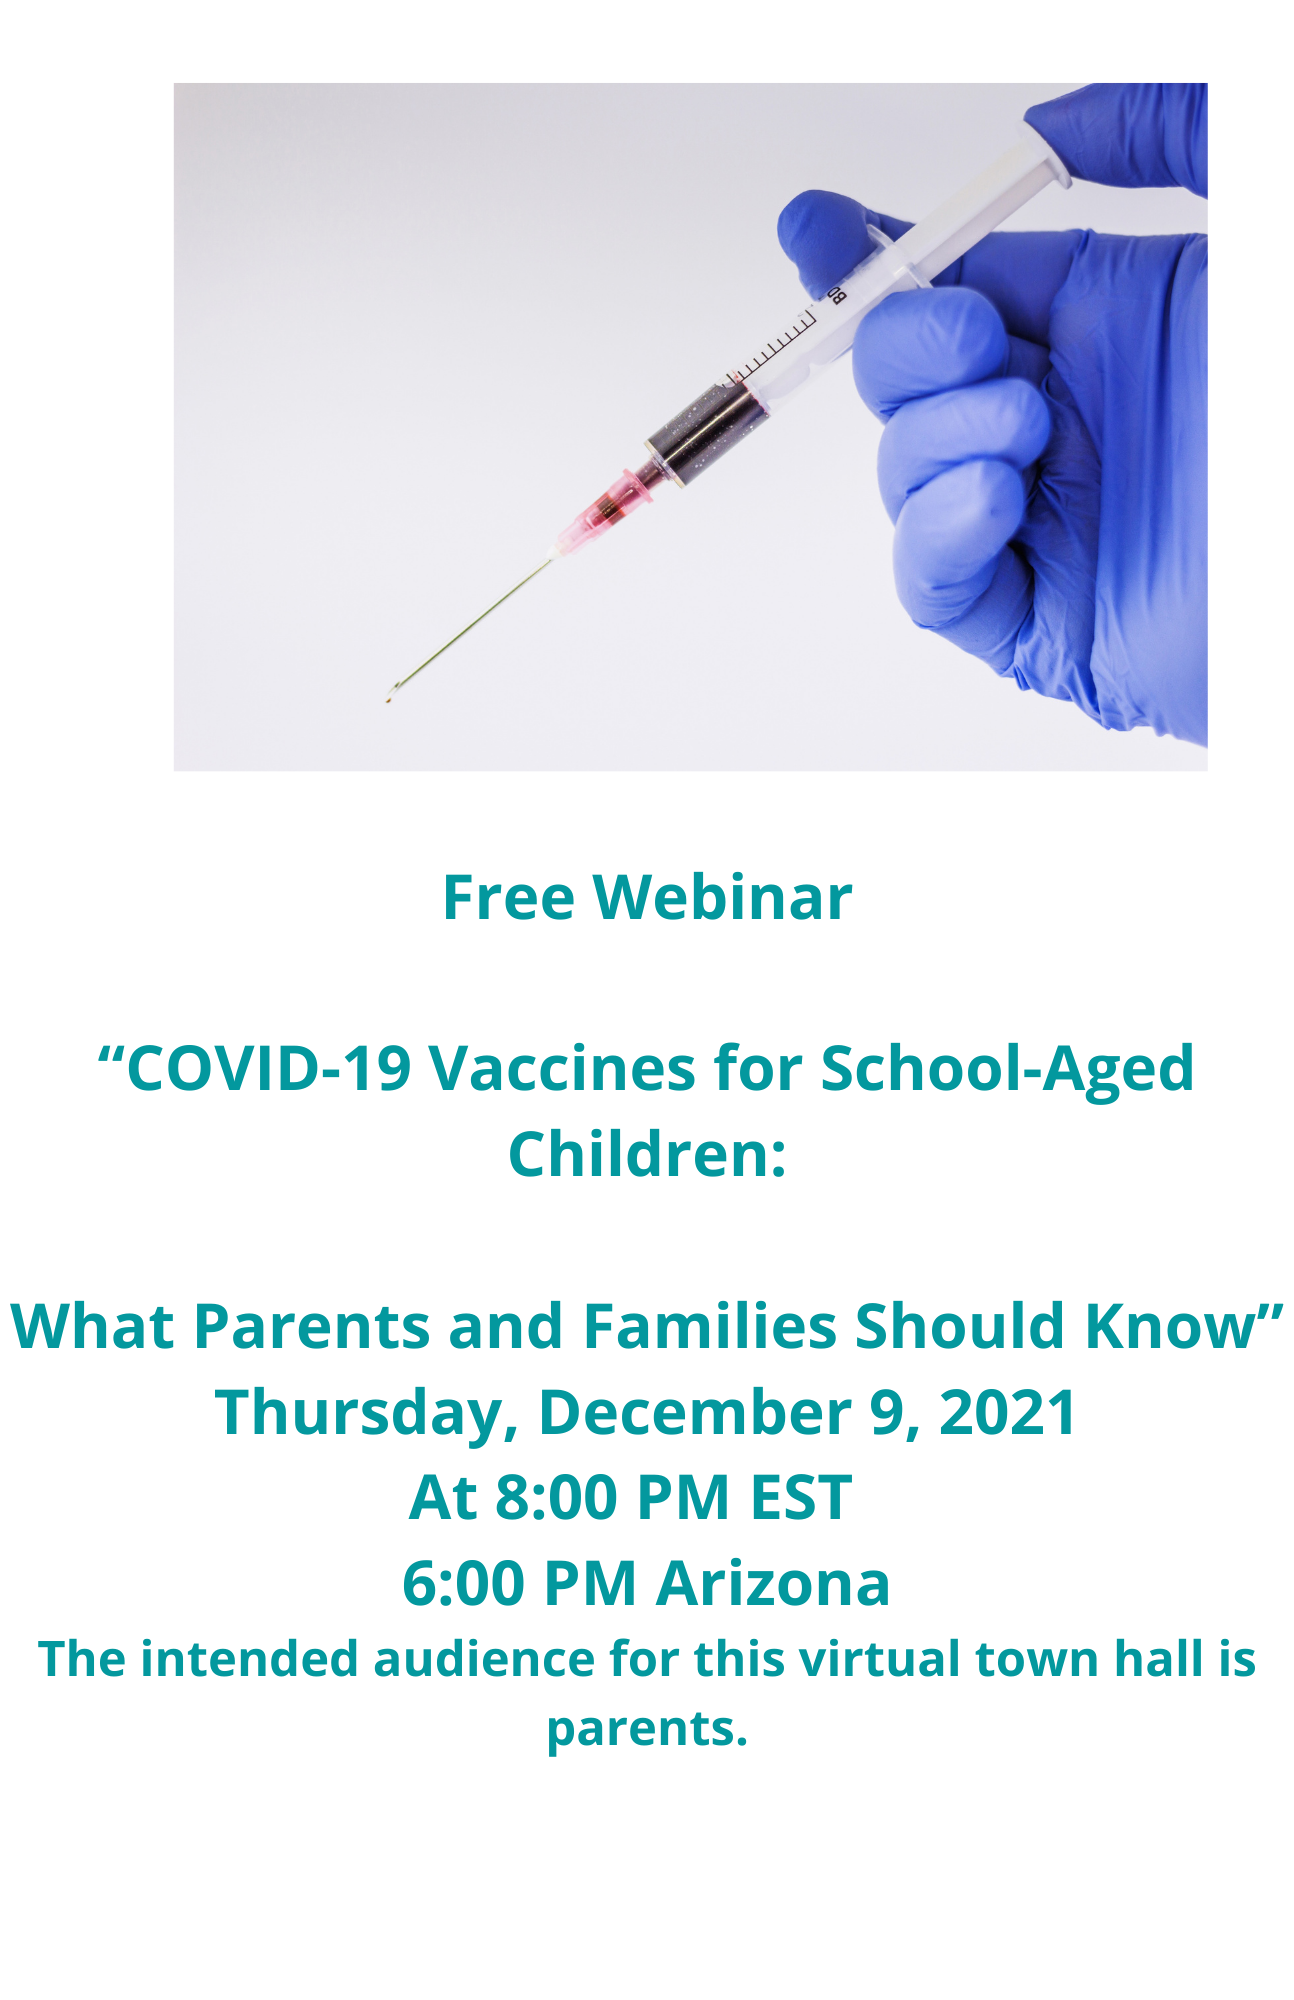 Covid19 Vaccines for School-Aged Children: What Parents and Families should know